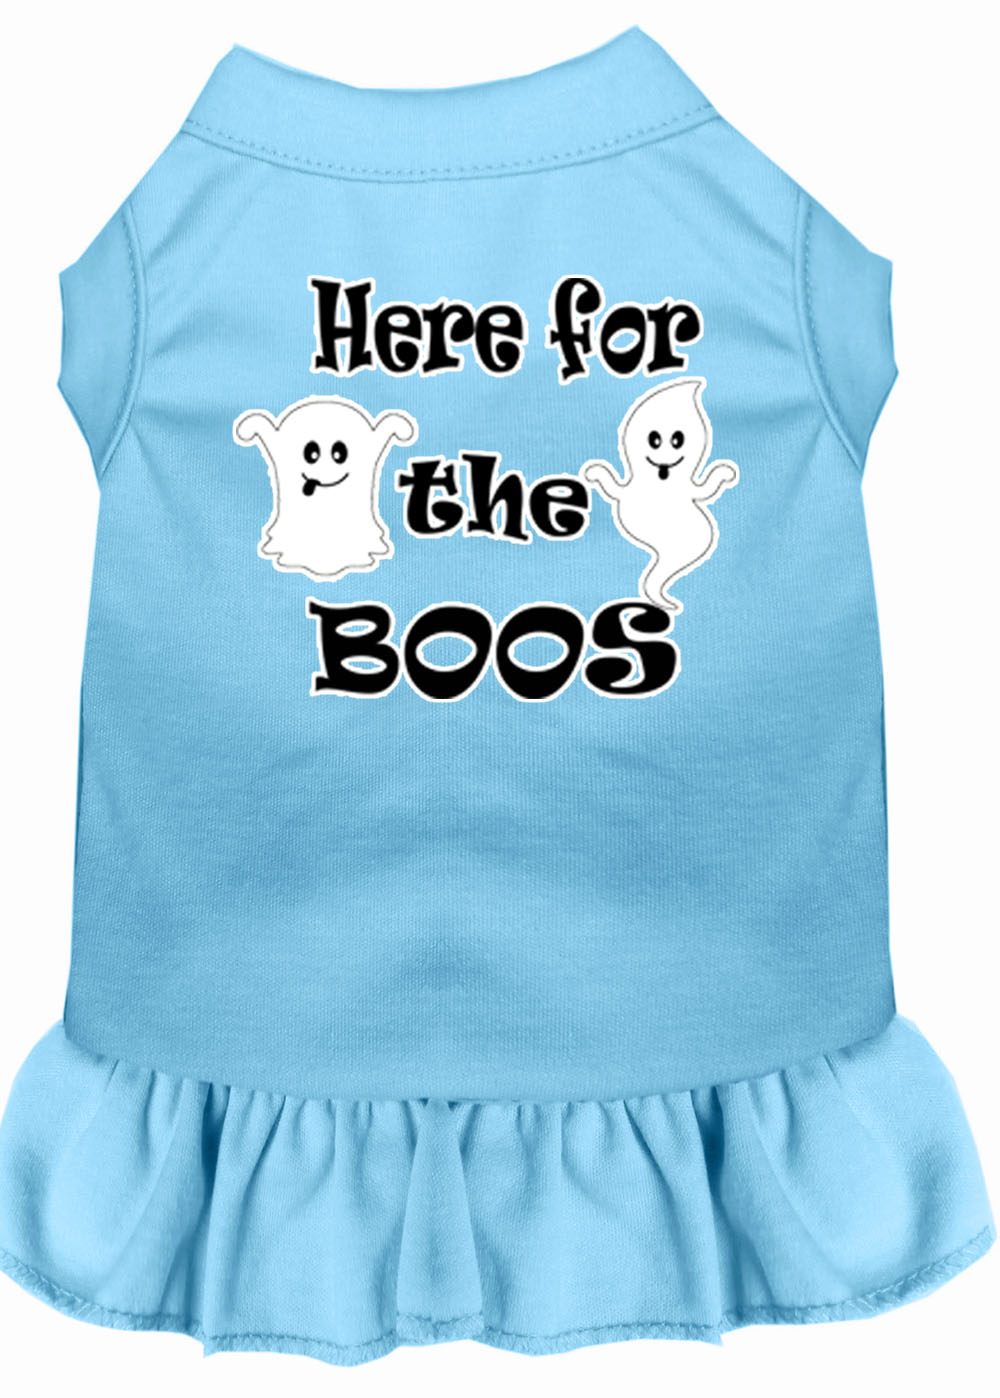 Here for the Boos Screen Print Dog Dress Baby Blue XXXL